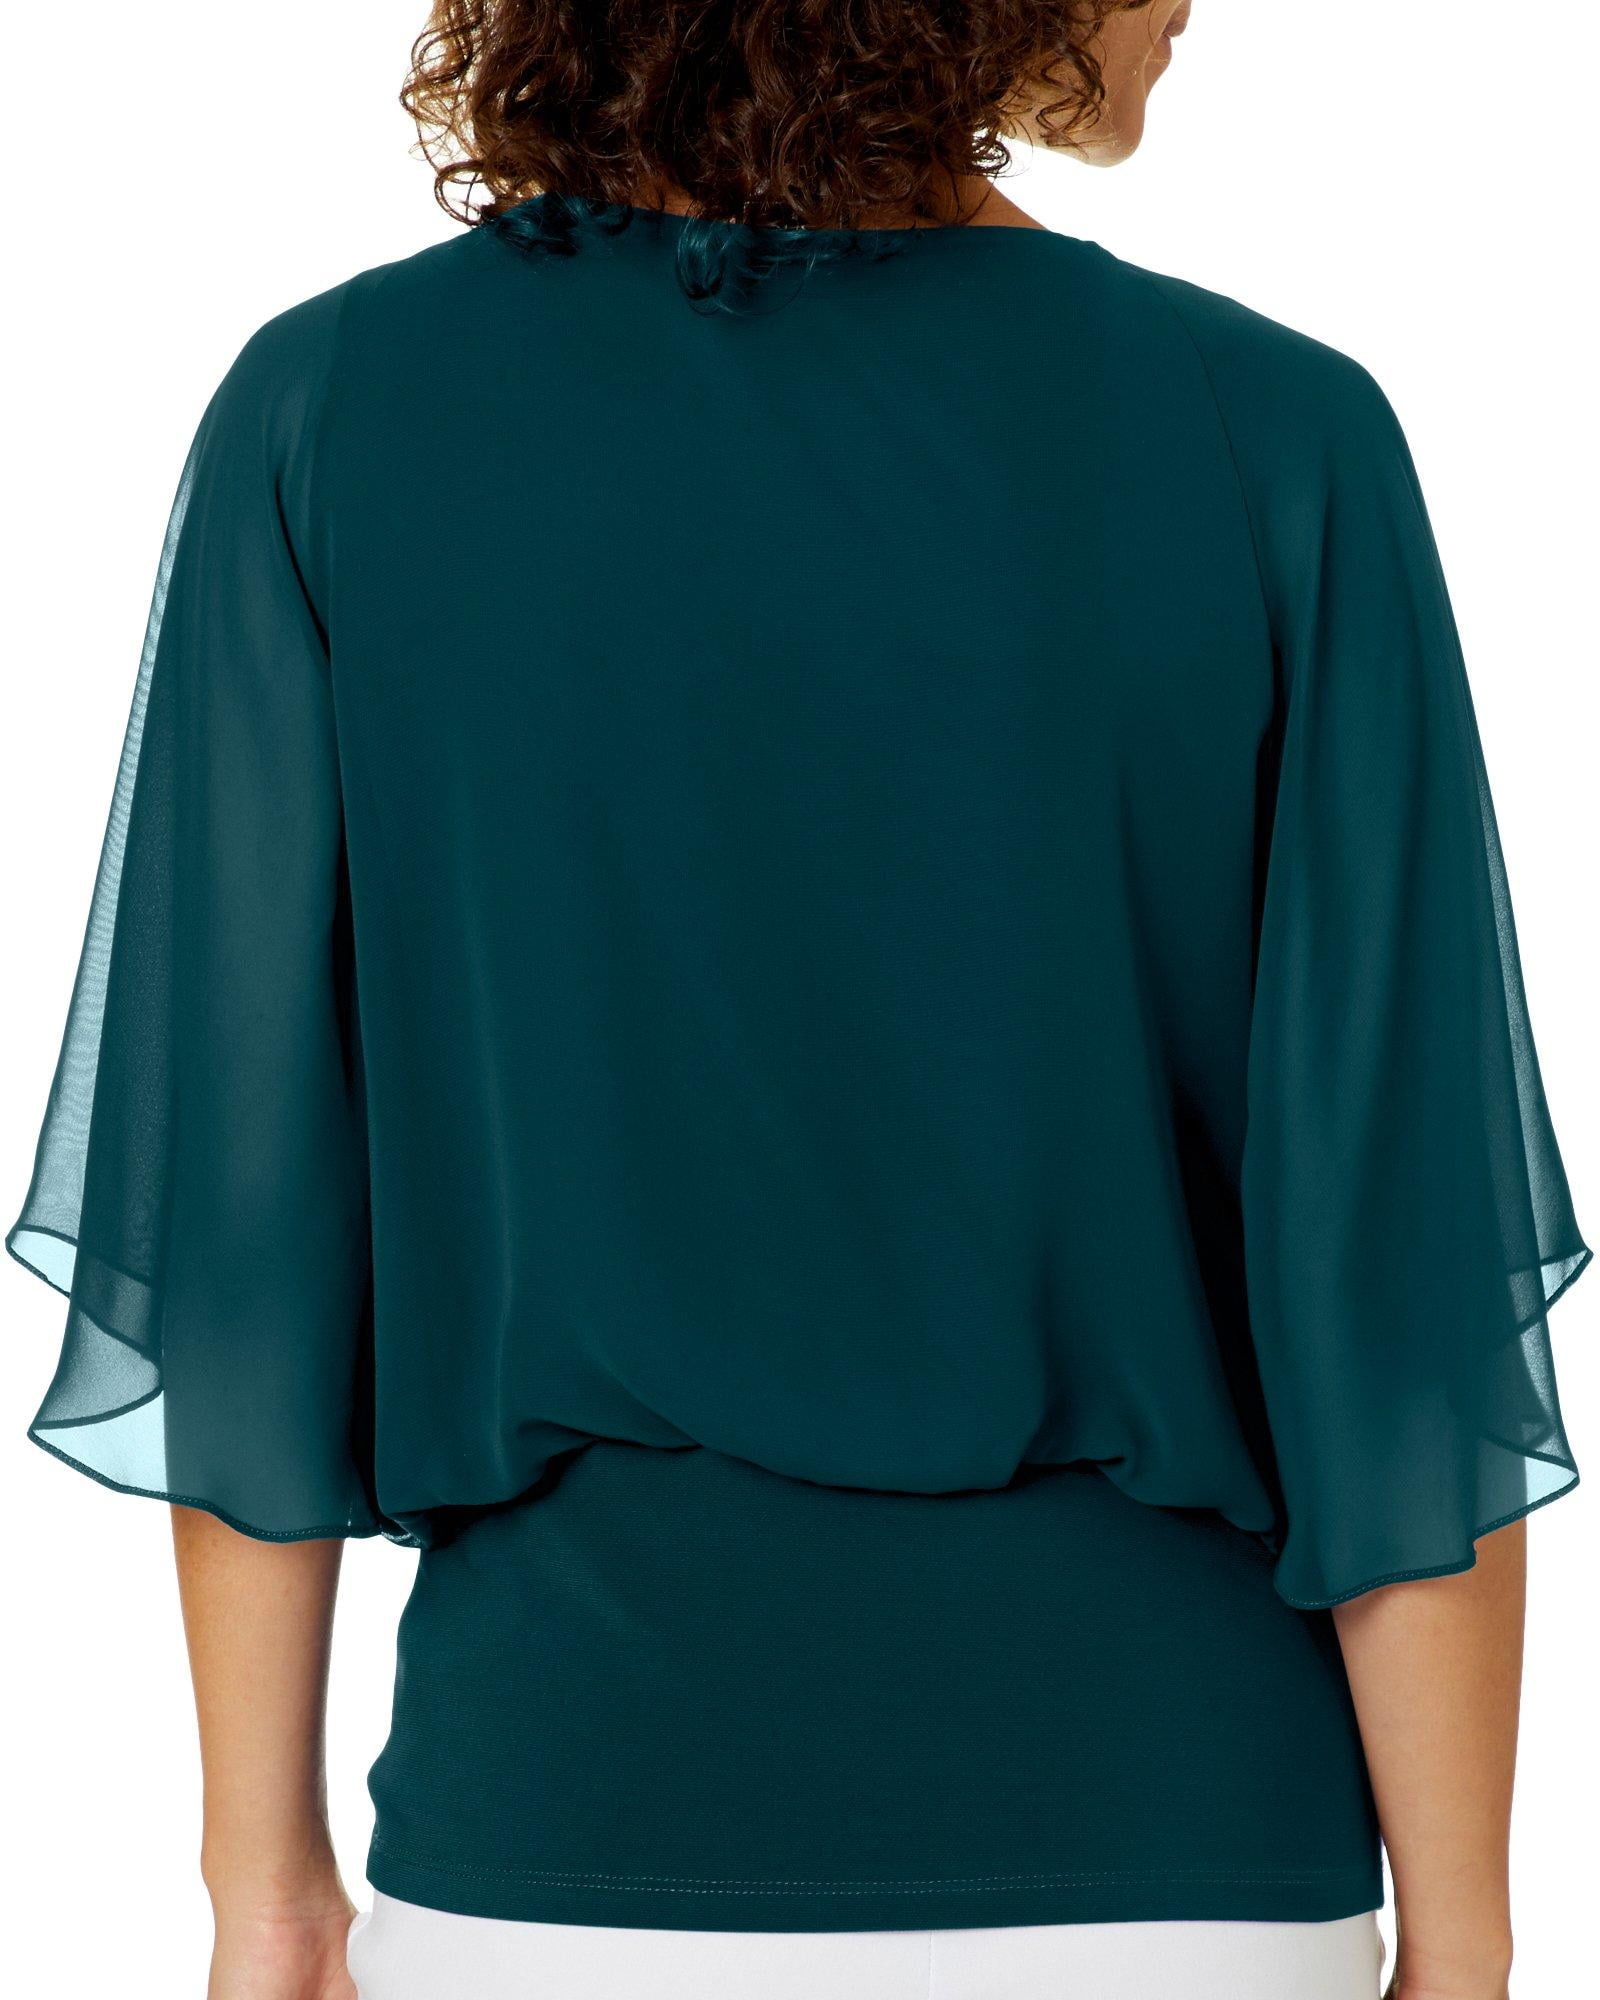 Coco Bianco Petite Solid Blouson Top Large Petite Teal Green